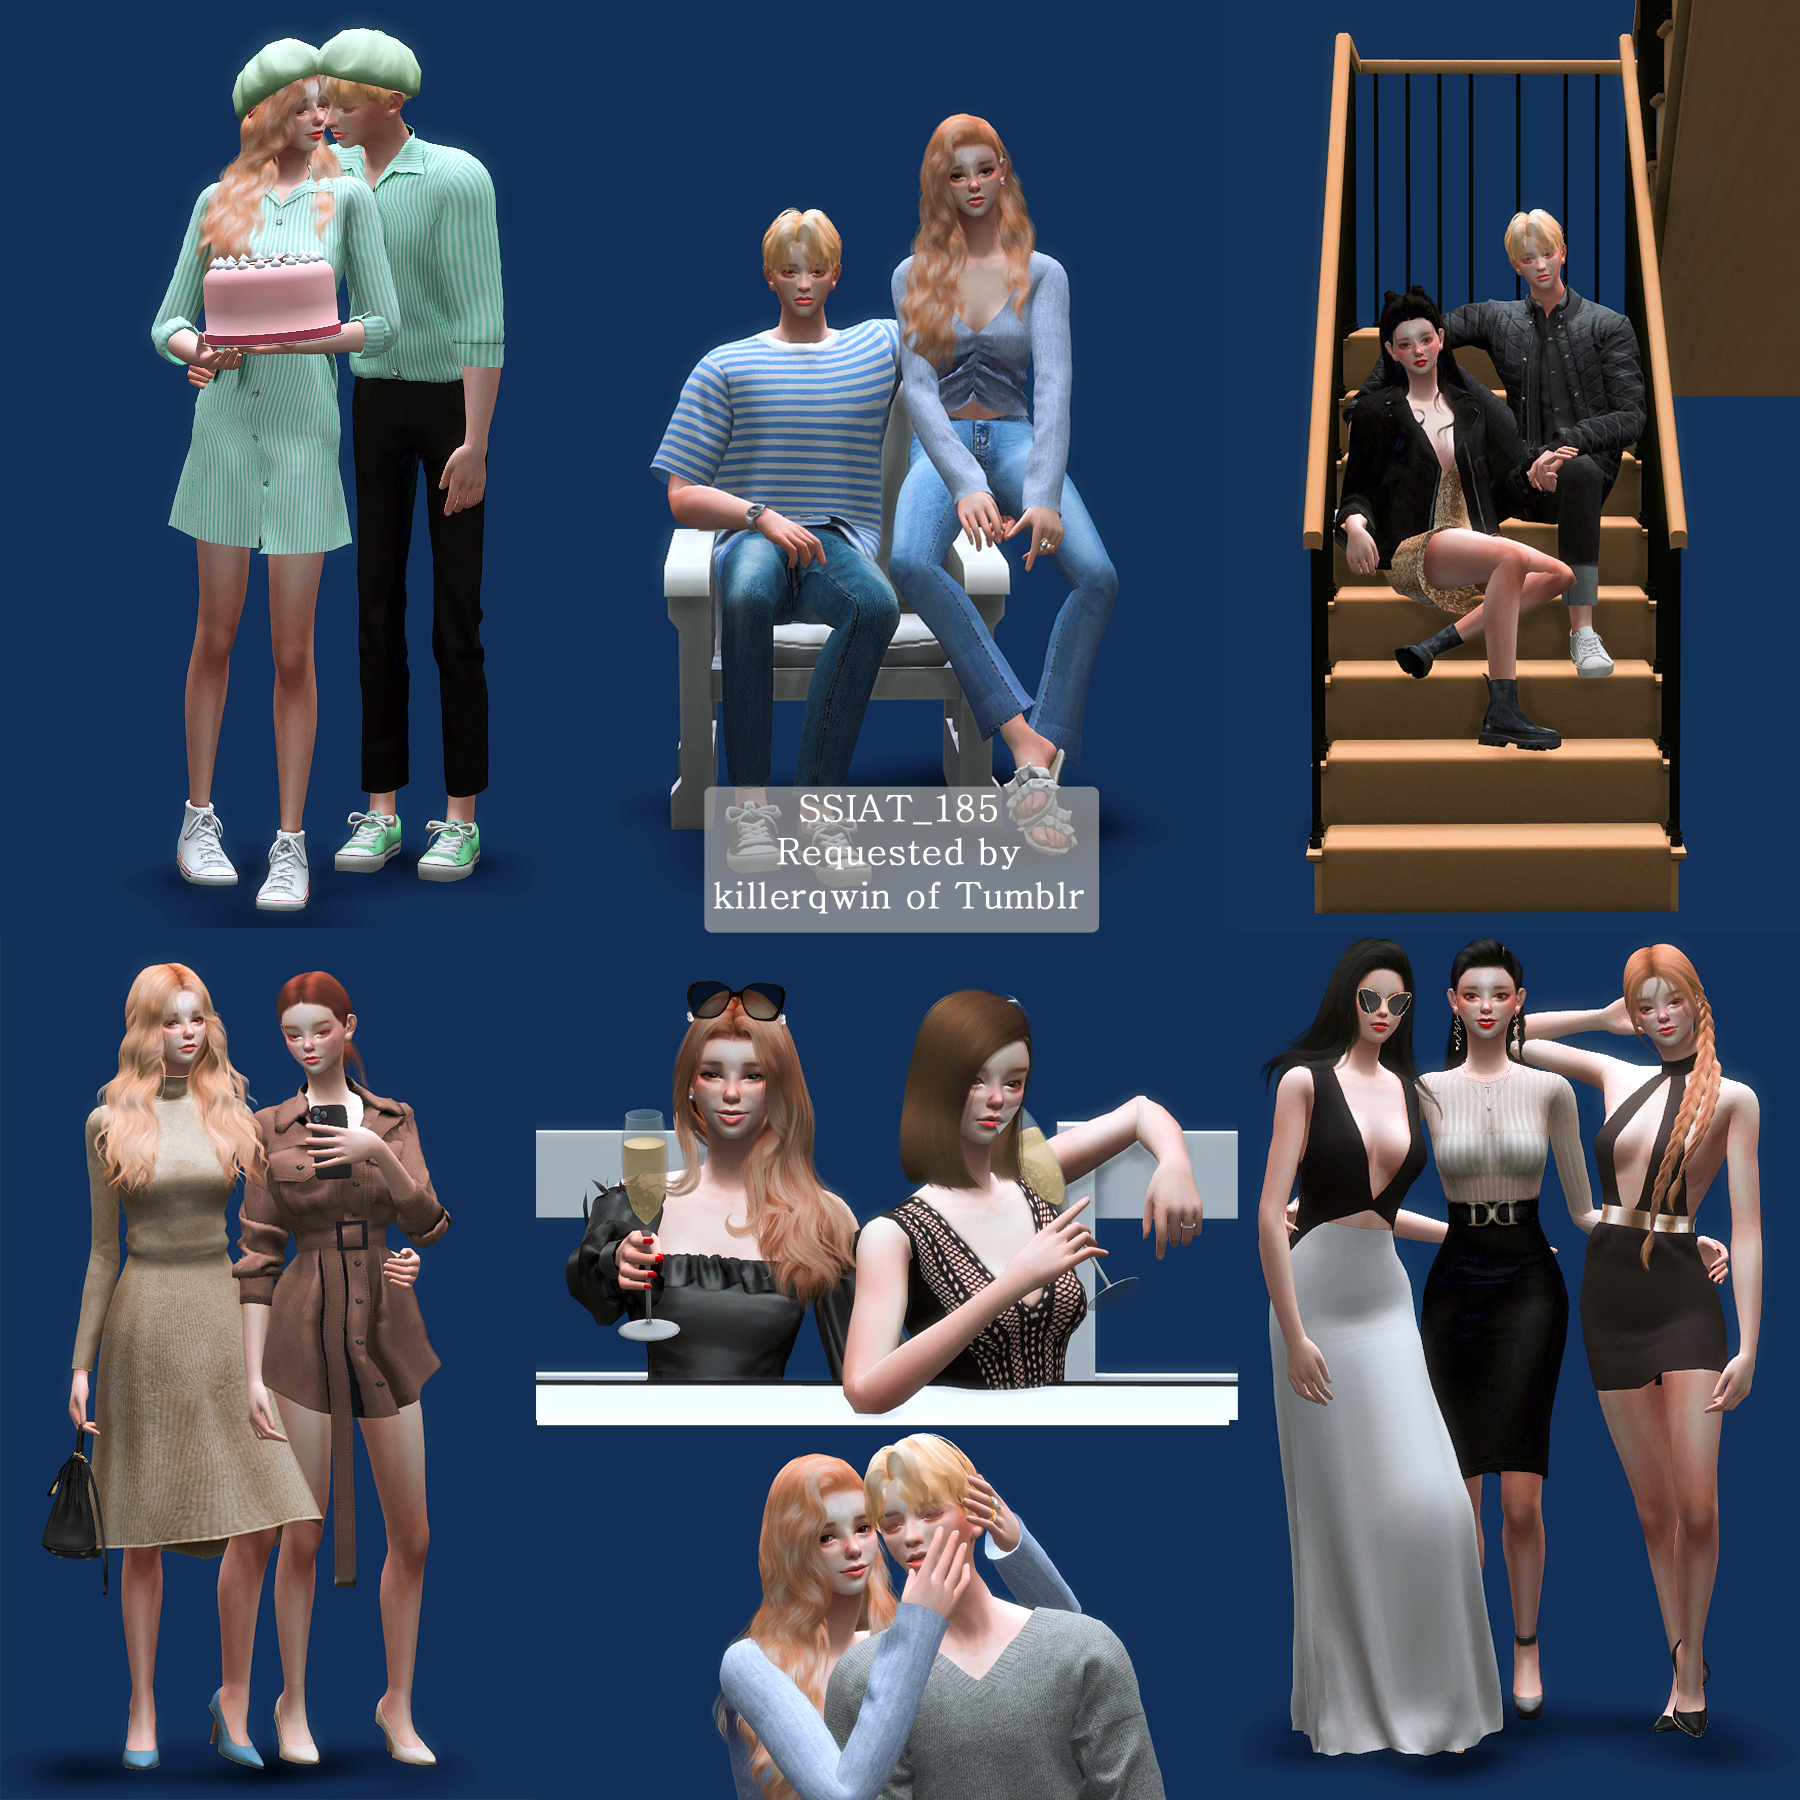 TS4 Poses — Here are two different group portraits for you...